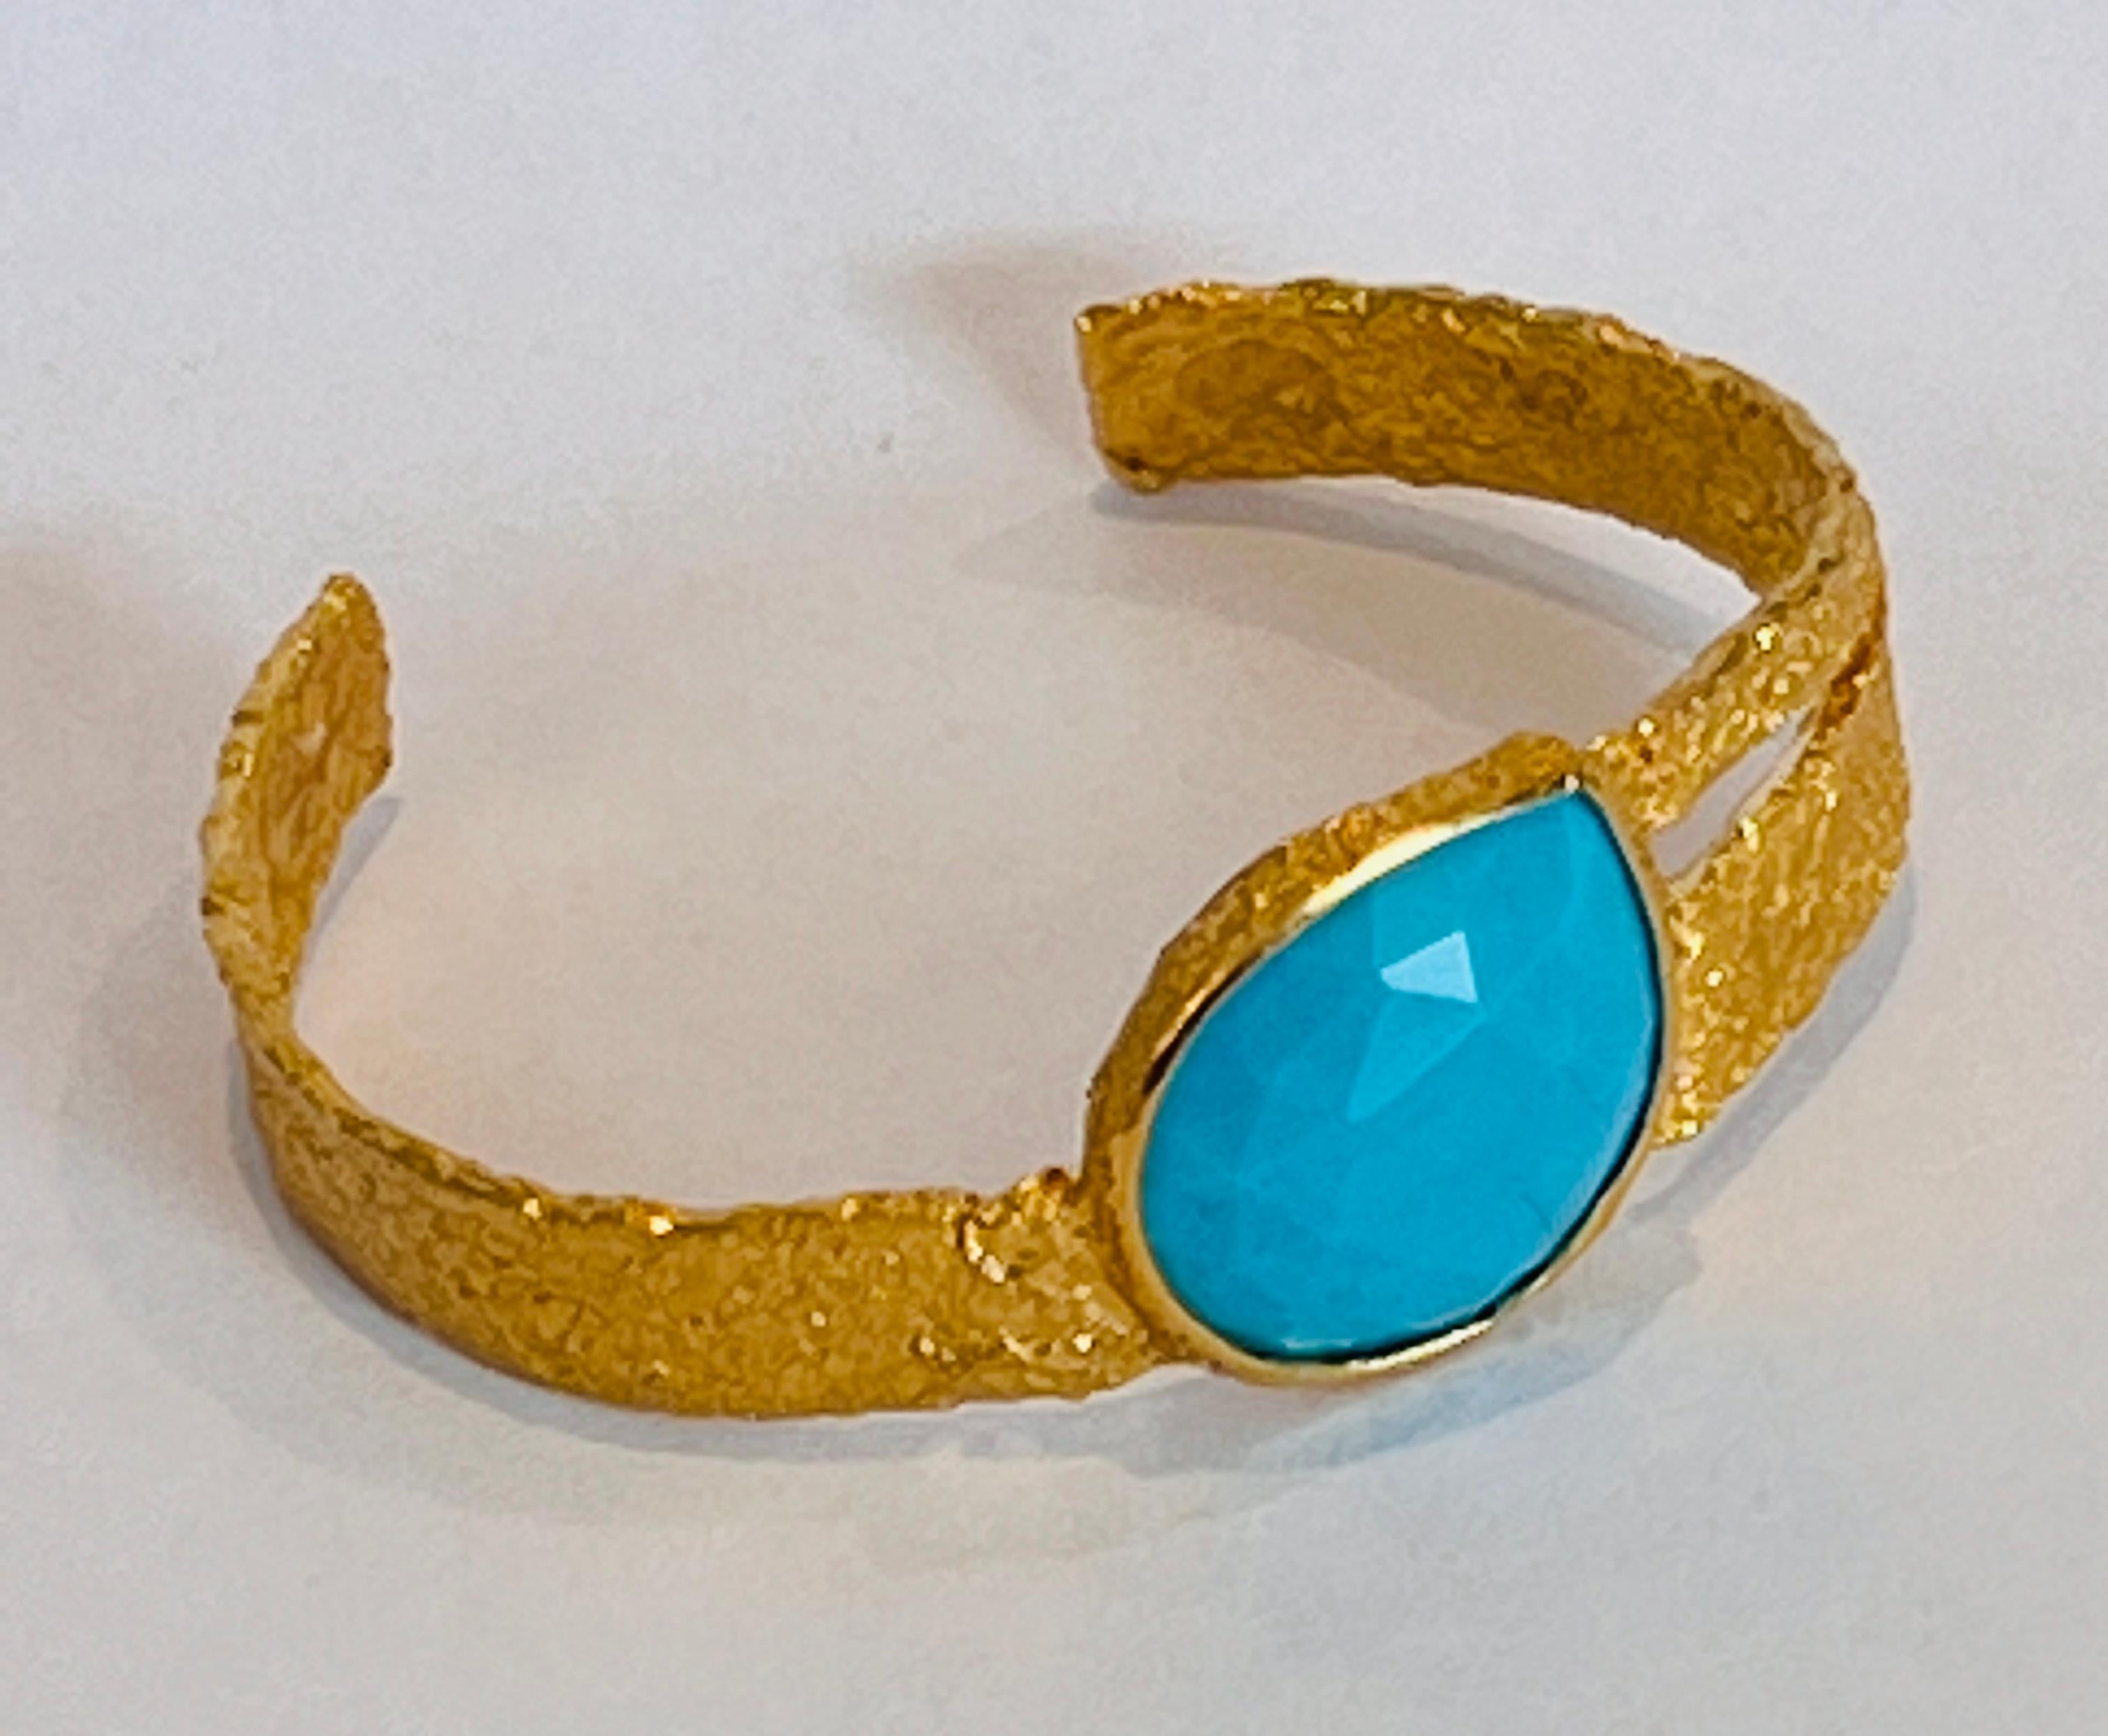 Women's 22k Gold Handmade Cuff with Turquoise, by Tagili For Sale